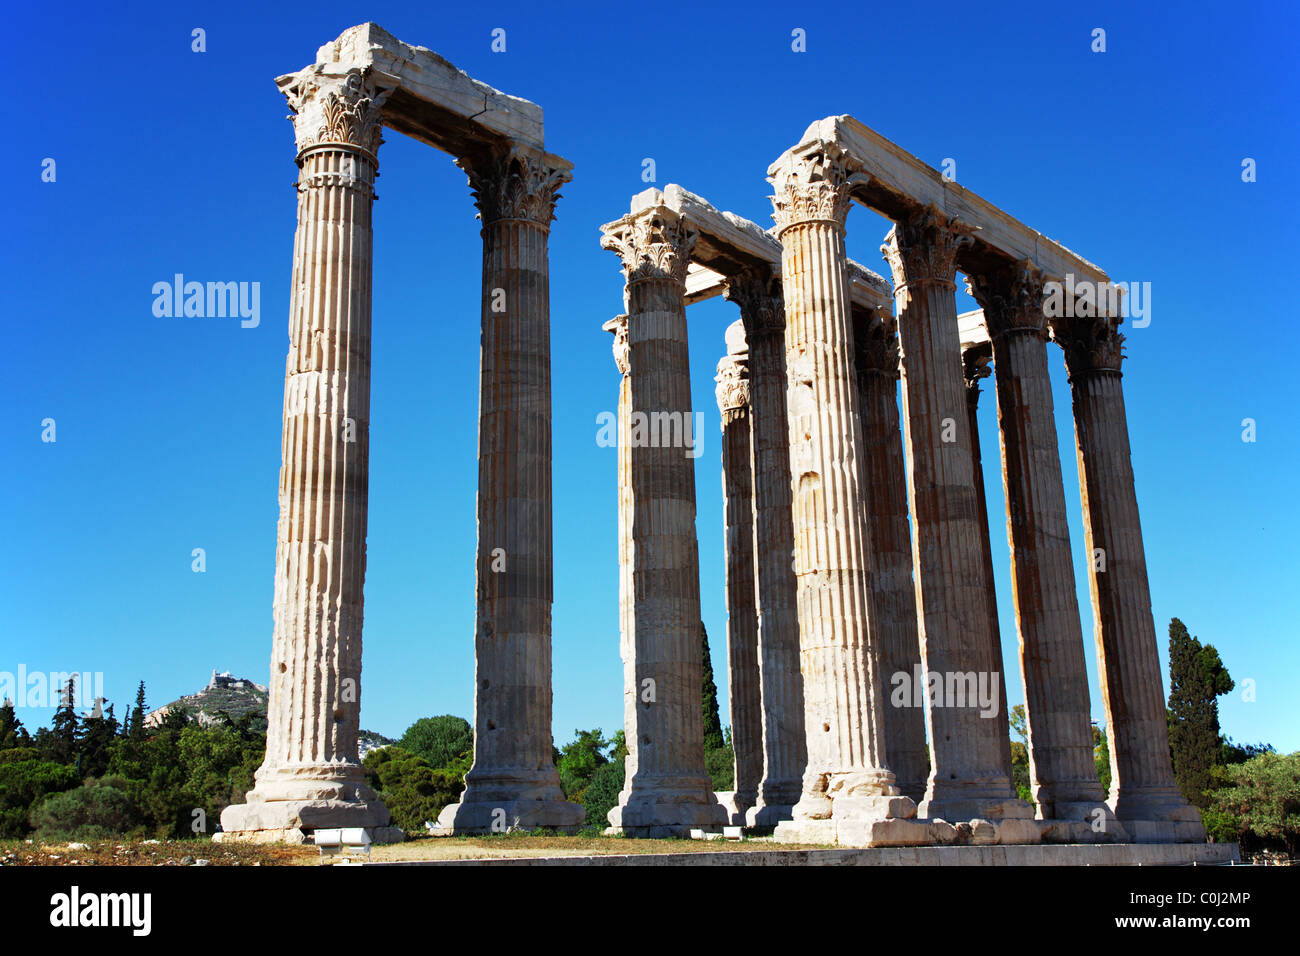 The temple of Olympian Zeus in Athens, Greece Stock Photo